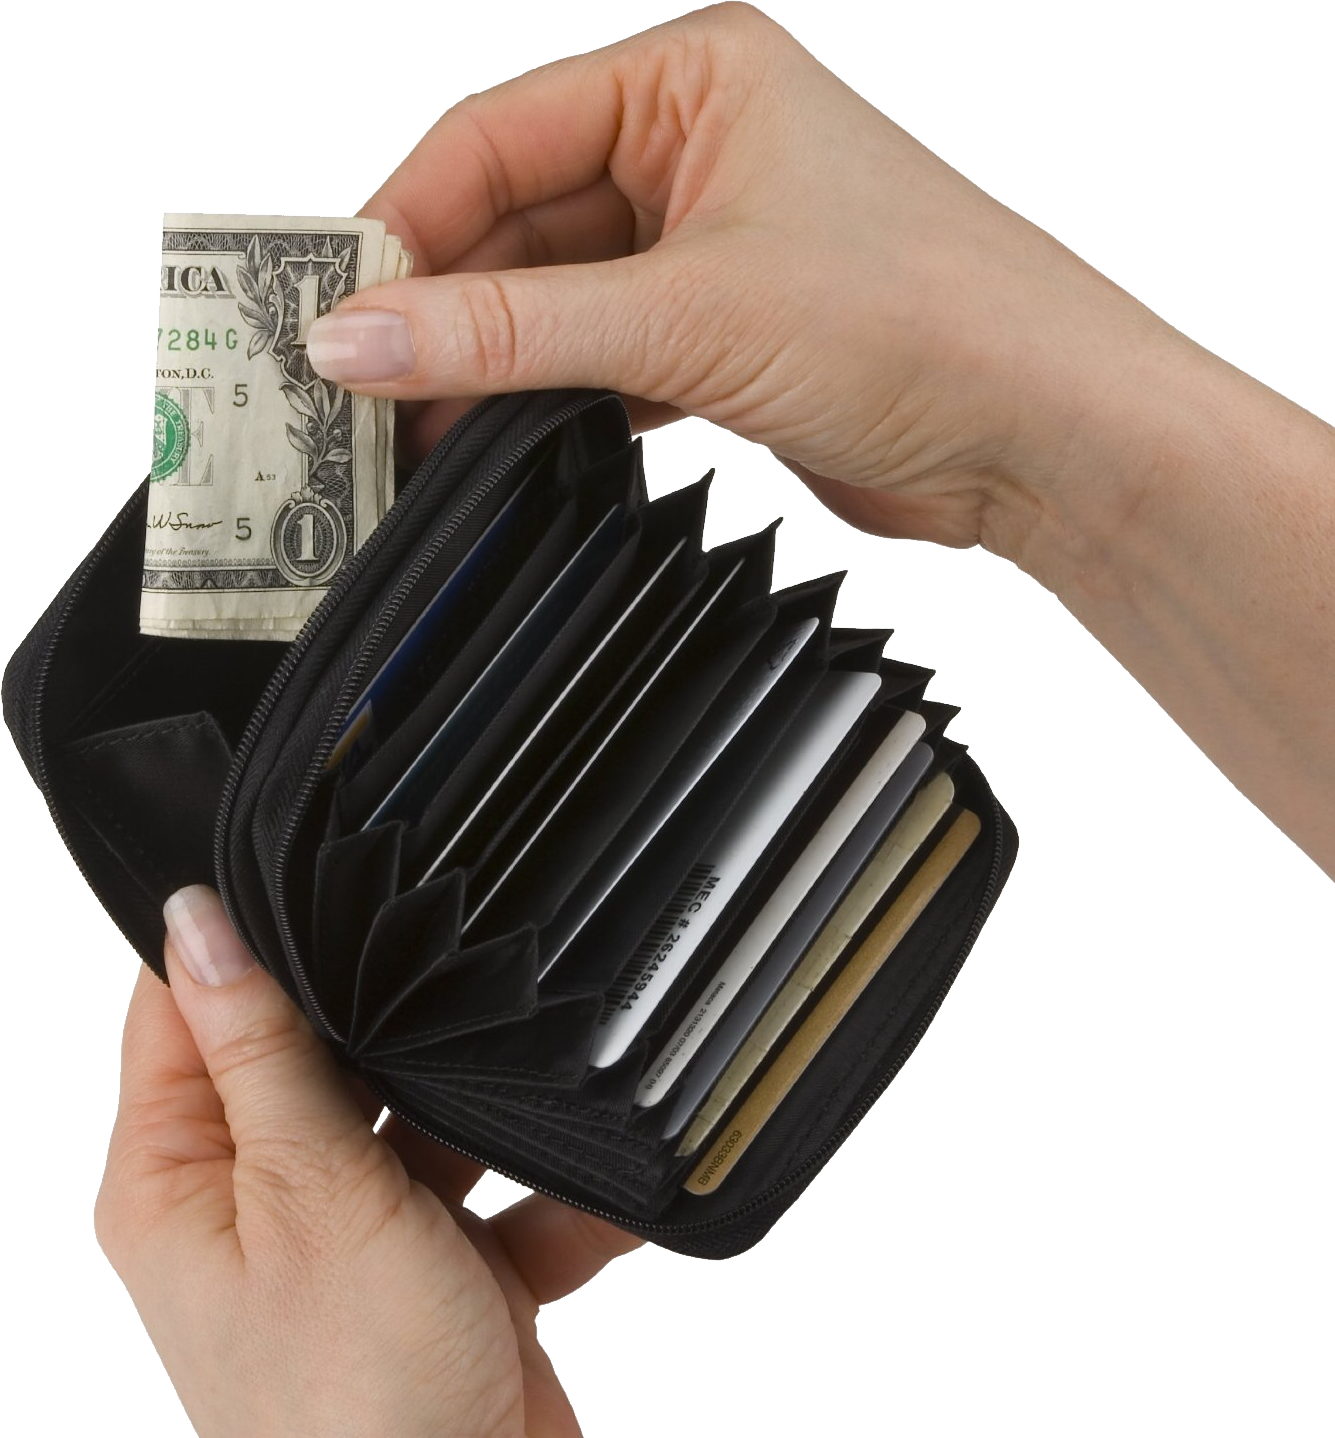 Wallet clipart hand. Black open png image